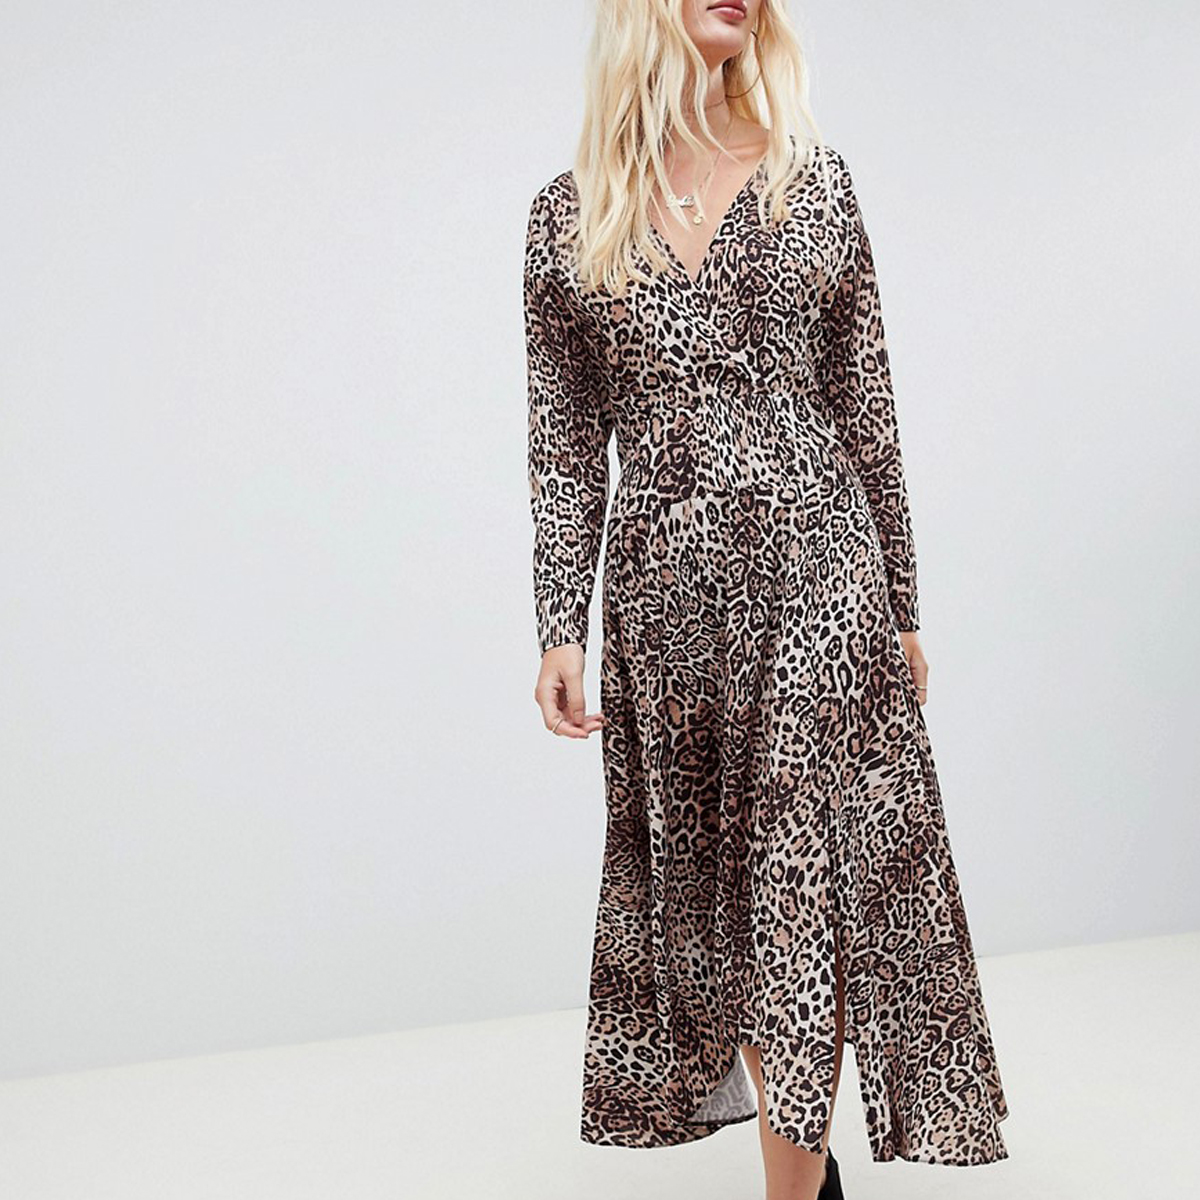 The Best Leopard-Print Dresses to Shop Now | Who What Wear